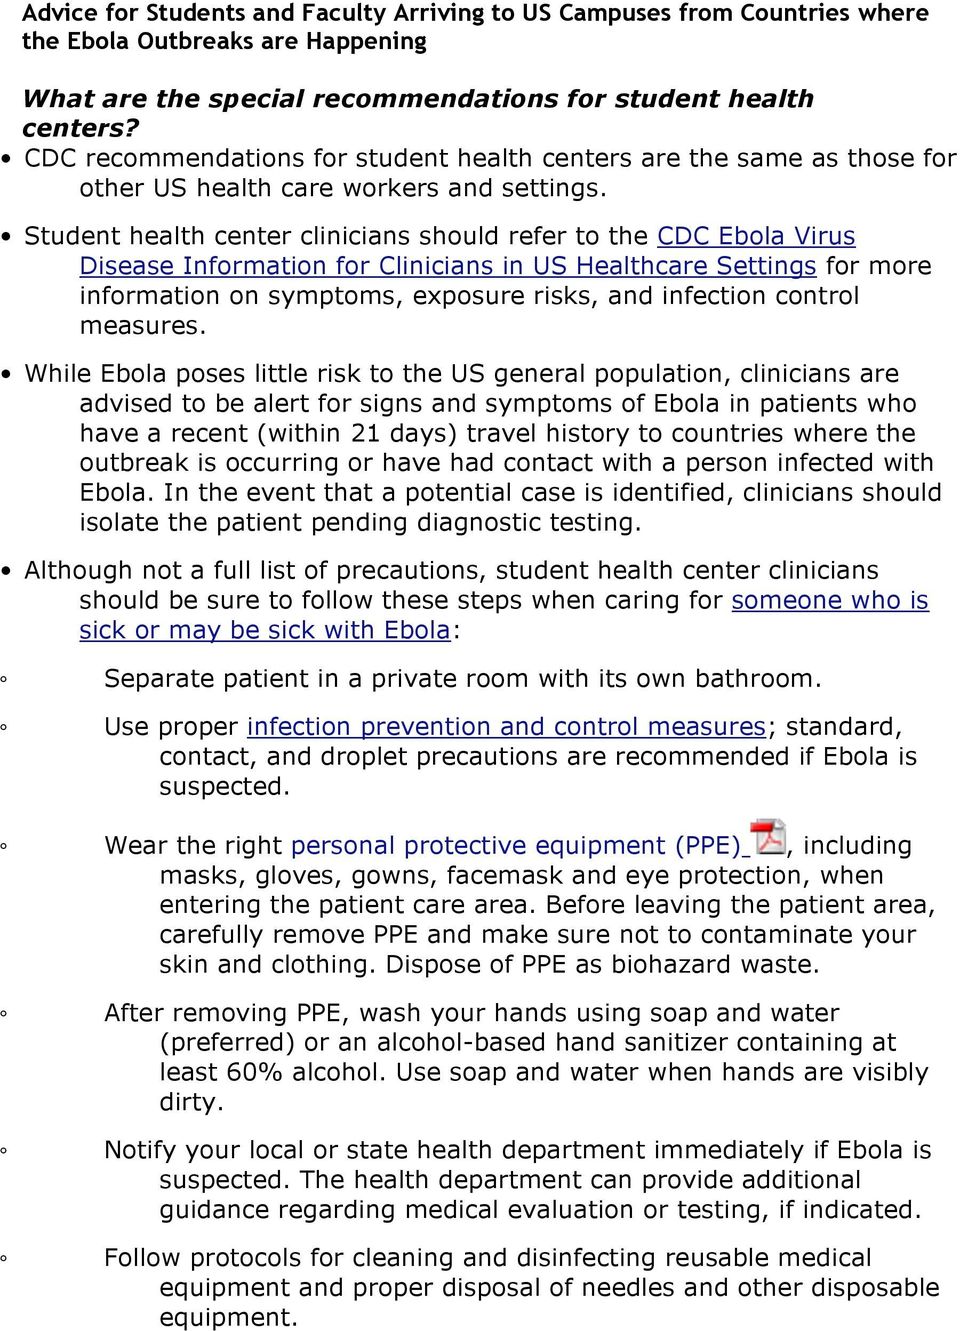 Student health center clinicians should refer to the CDC Ebola Virus Disease Information for Clinicians in US Healthcare Settings for more information on symptoms, exposure risks, and infection